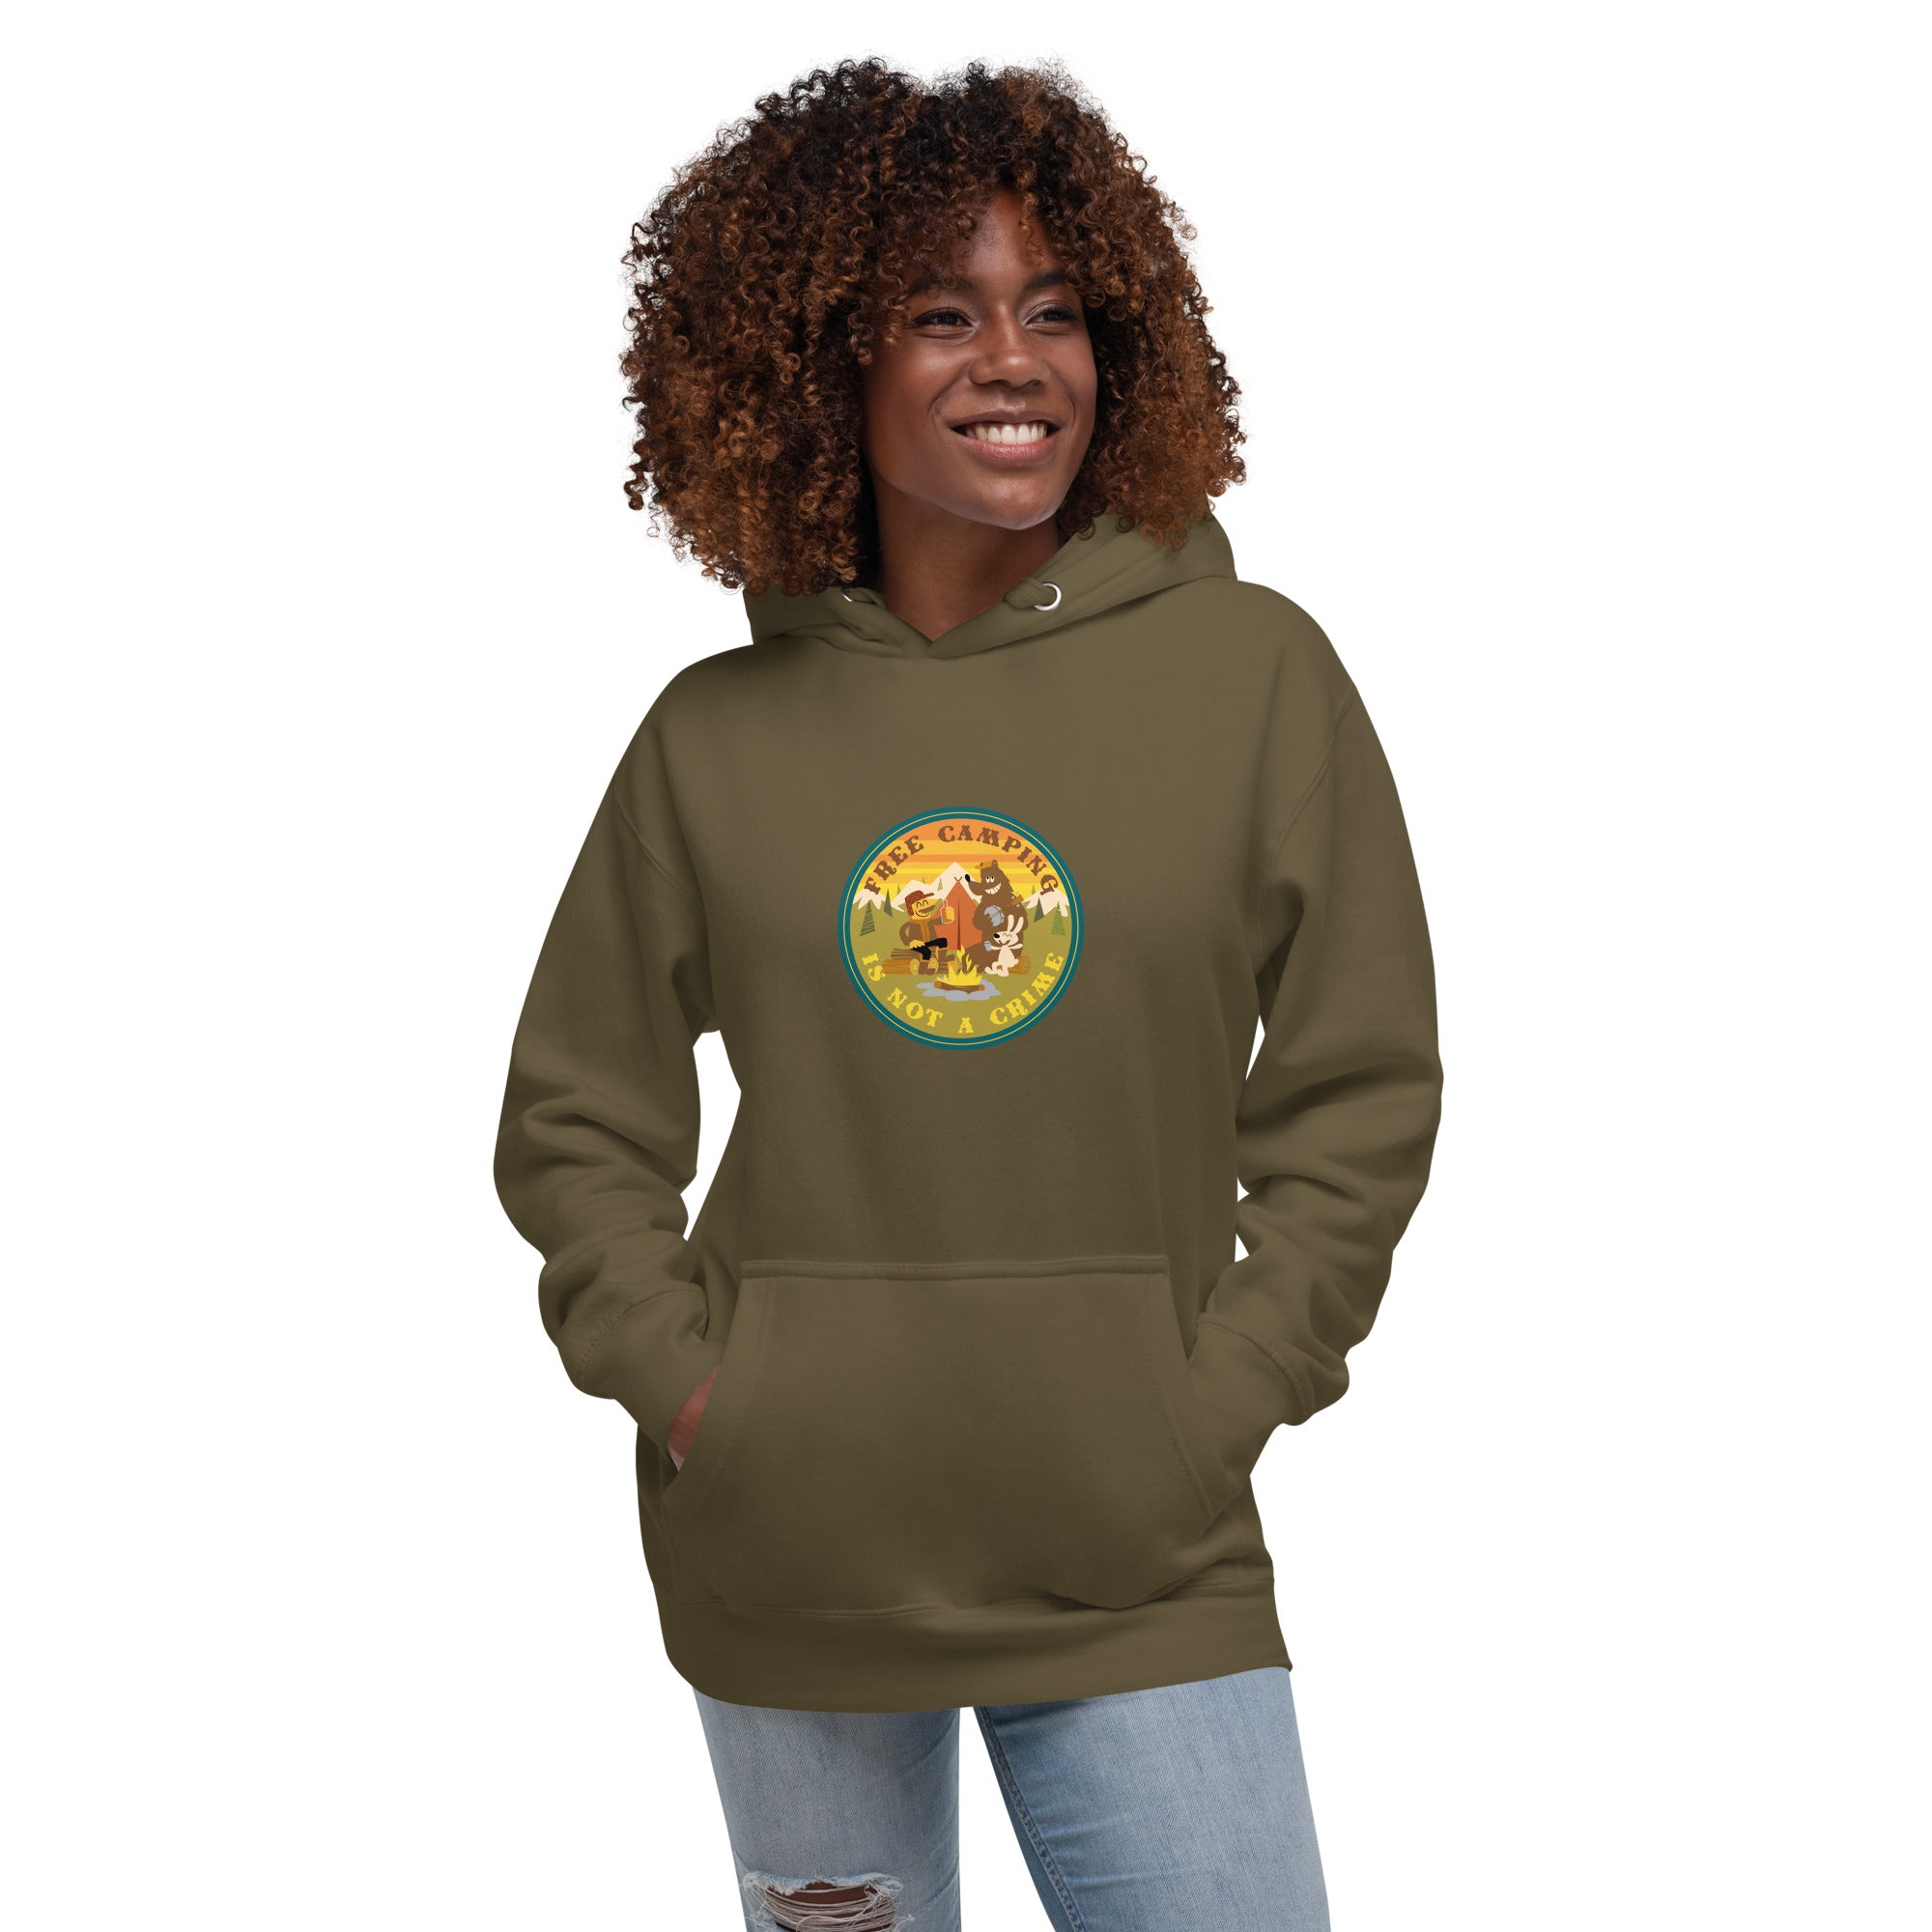 Unisex Cotton Hoodie Free camping is not a crime